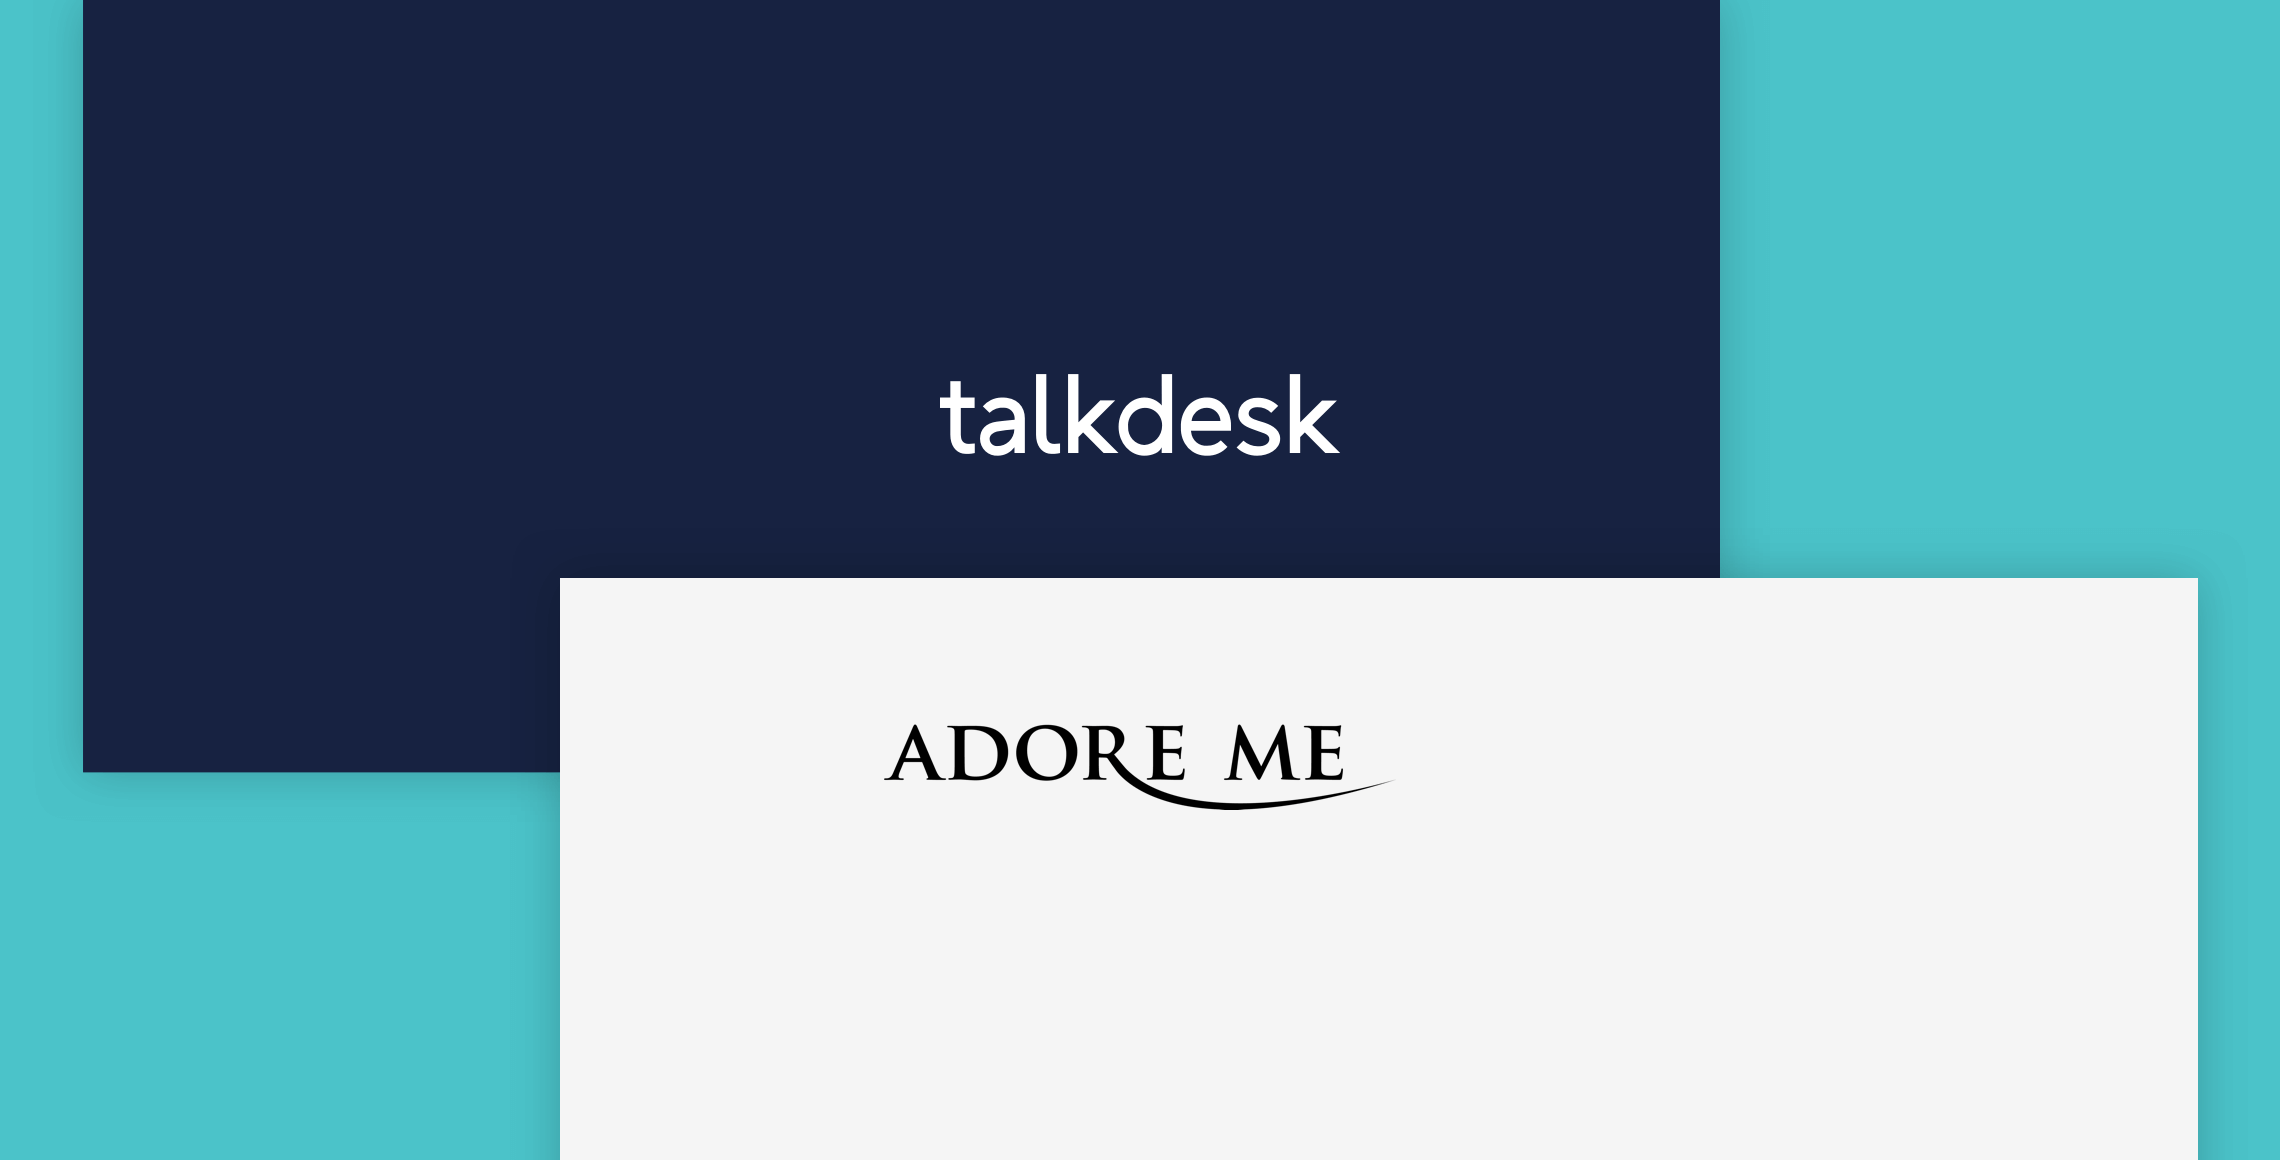 Talkdesk Chosen to Support Adore Me Customer Service Growth and Brand  Expansion